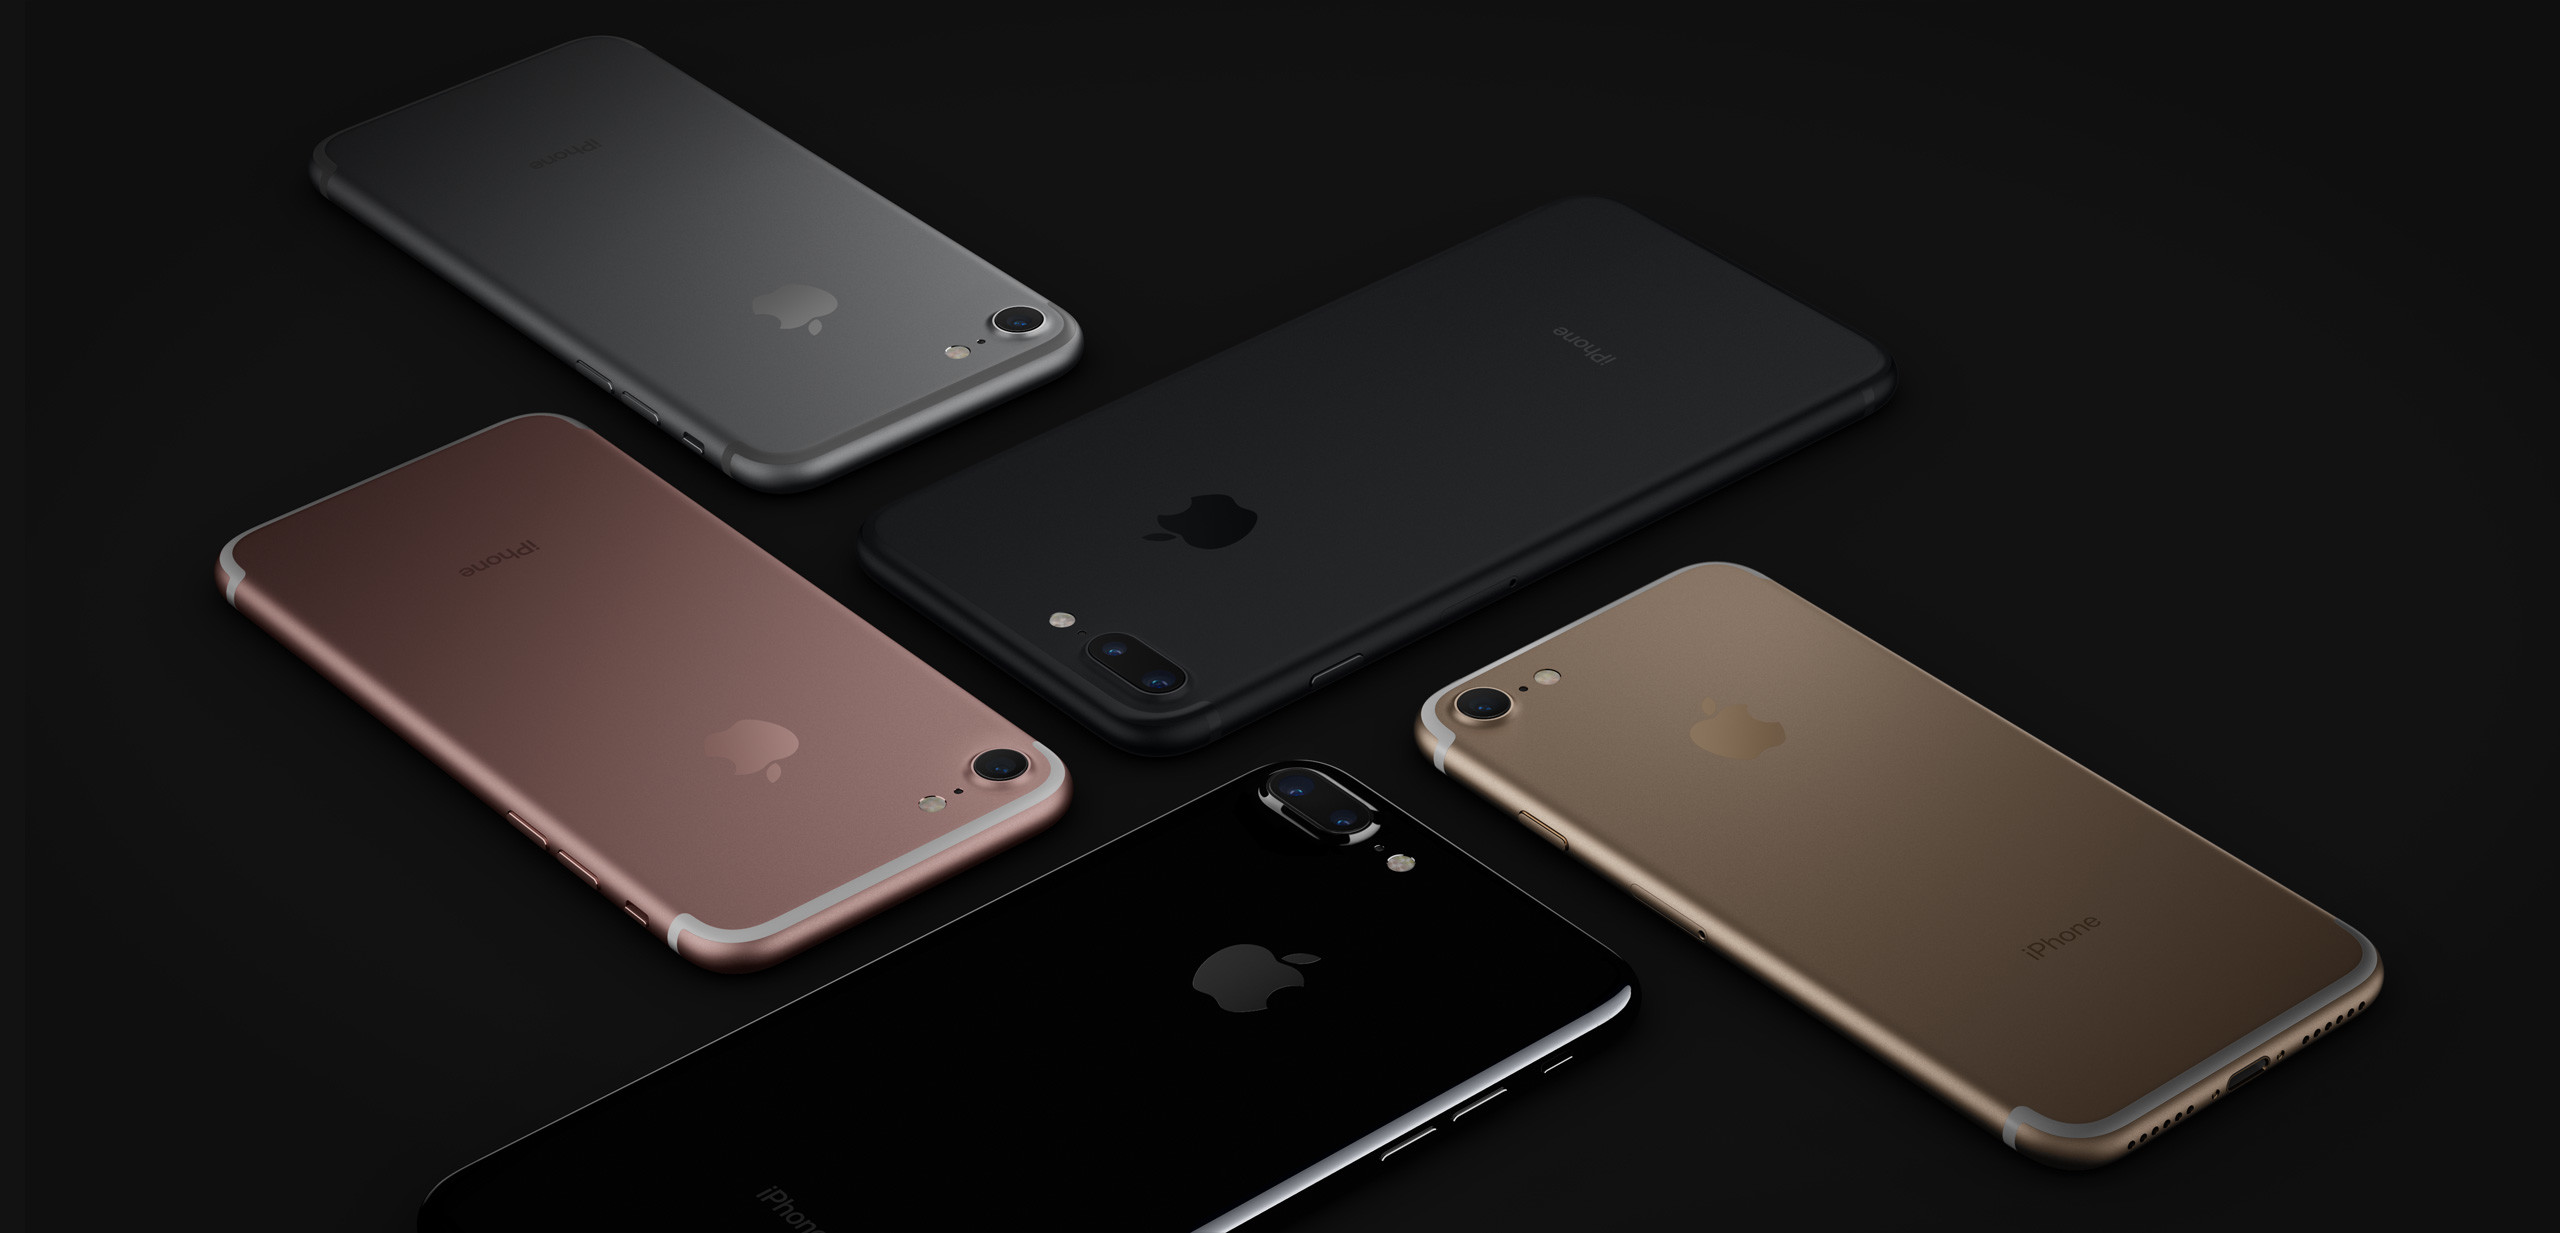 Apple iPhone 7 and iPhone 7 Plus: here are all the official images to gawk  at!